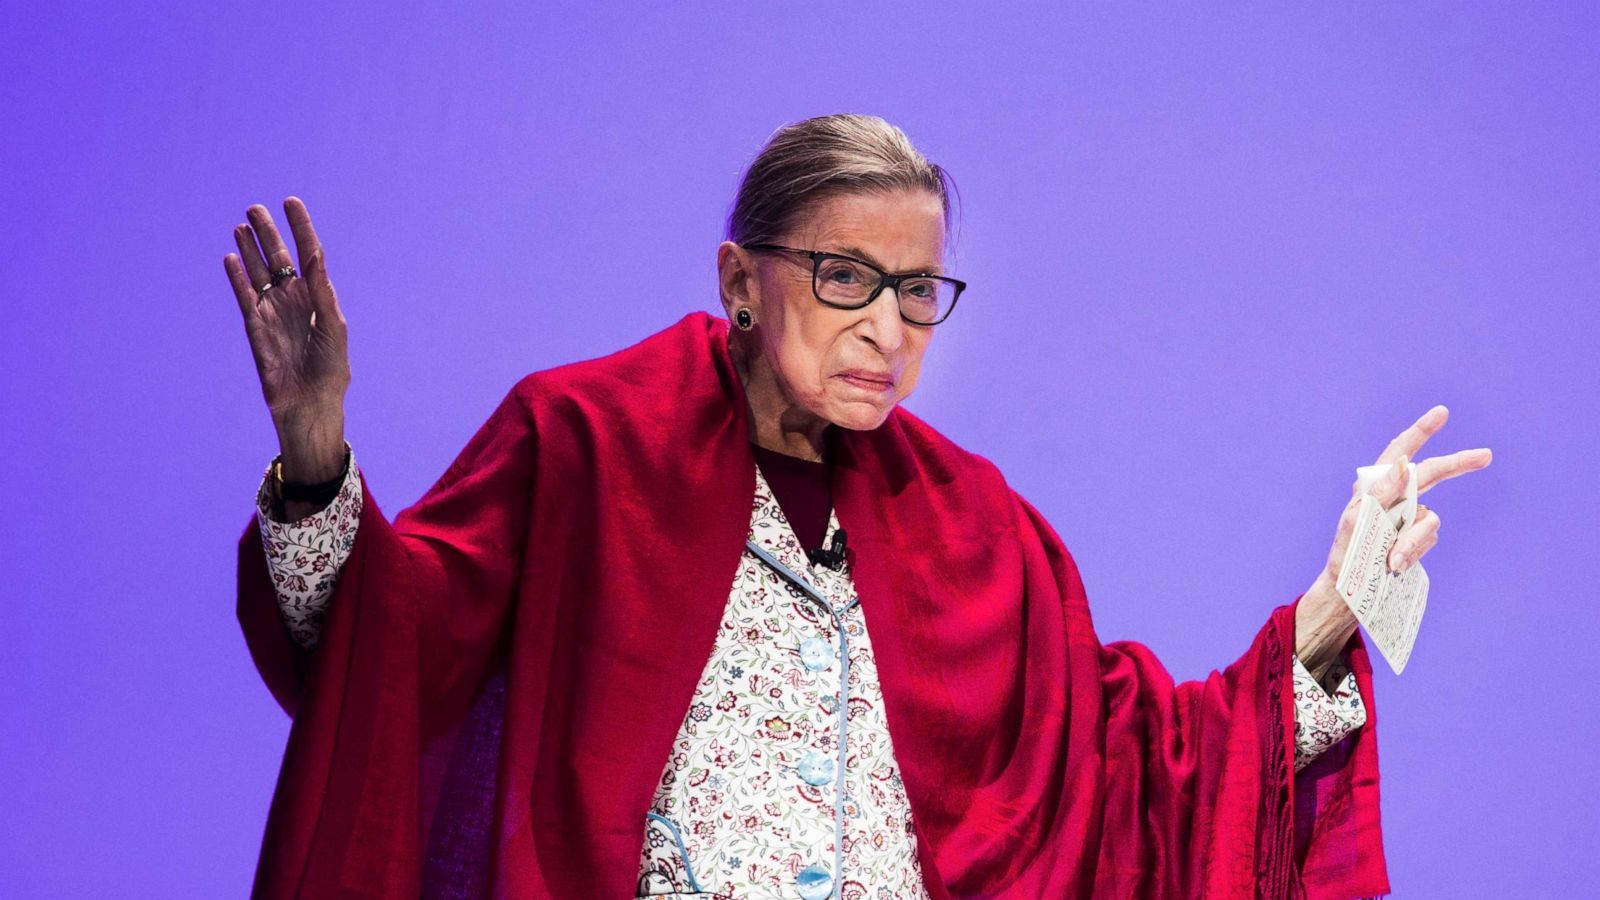 Ruth Bader Ginsburg wins $1M Berggruen prize for philosophy and culture